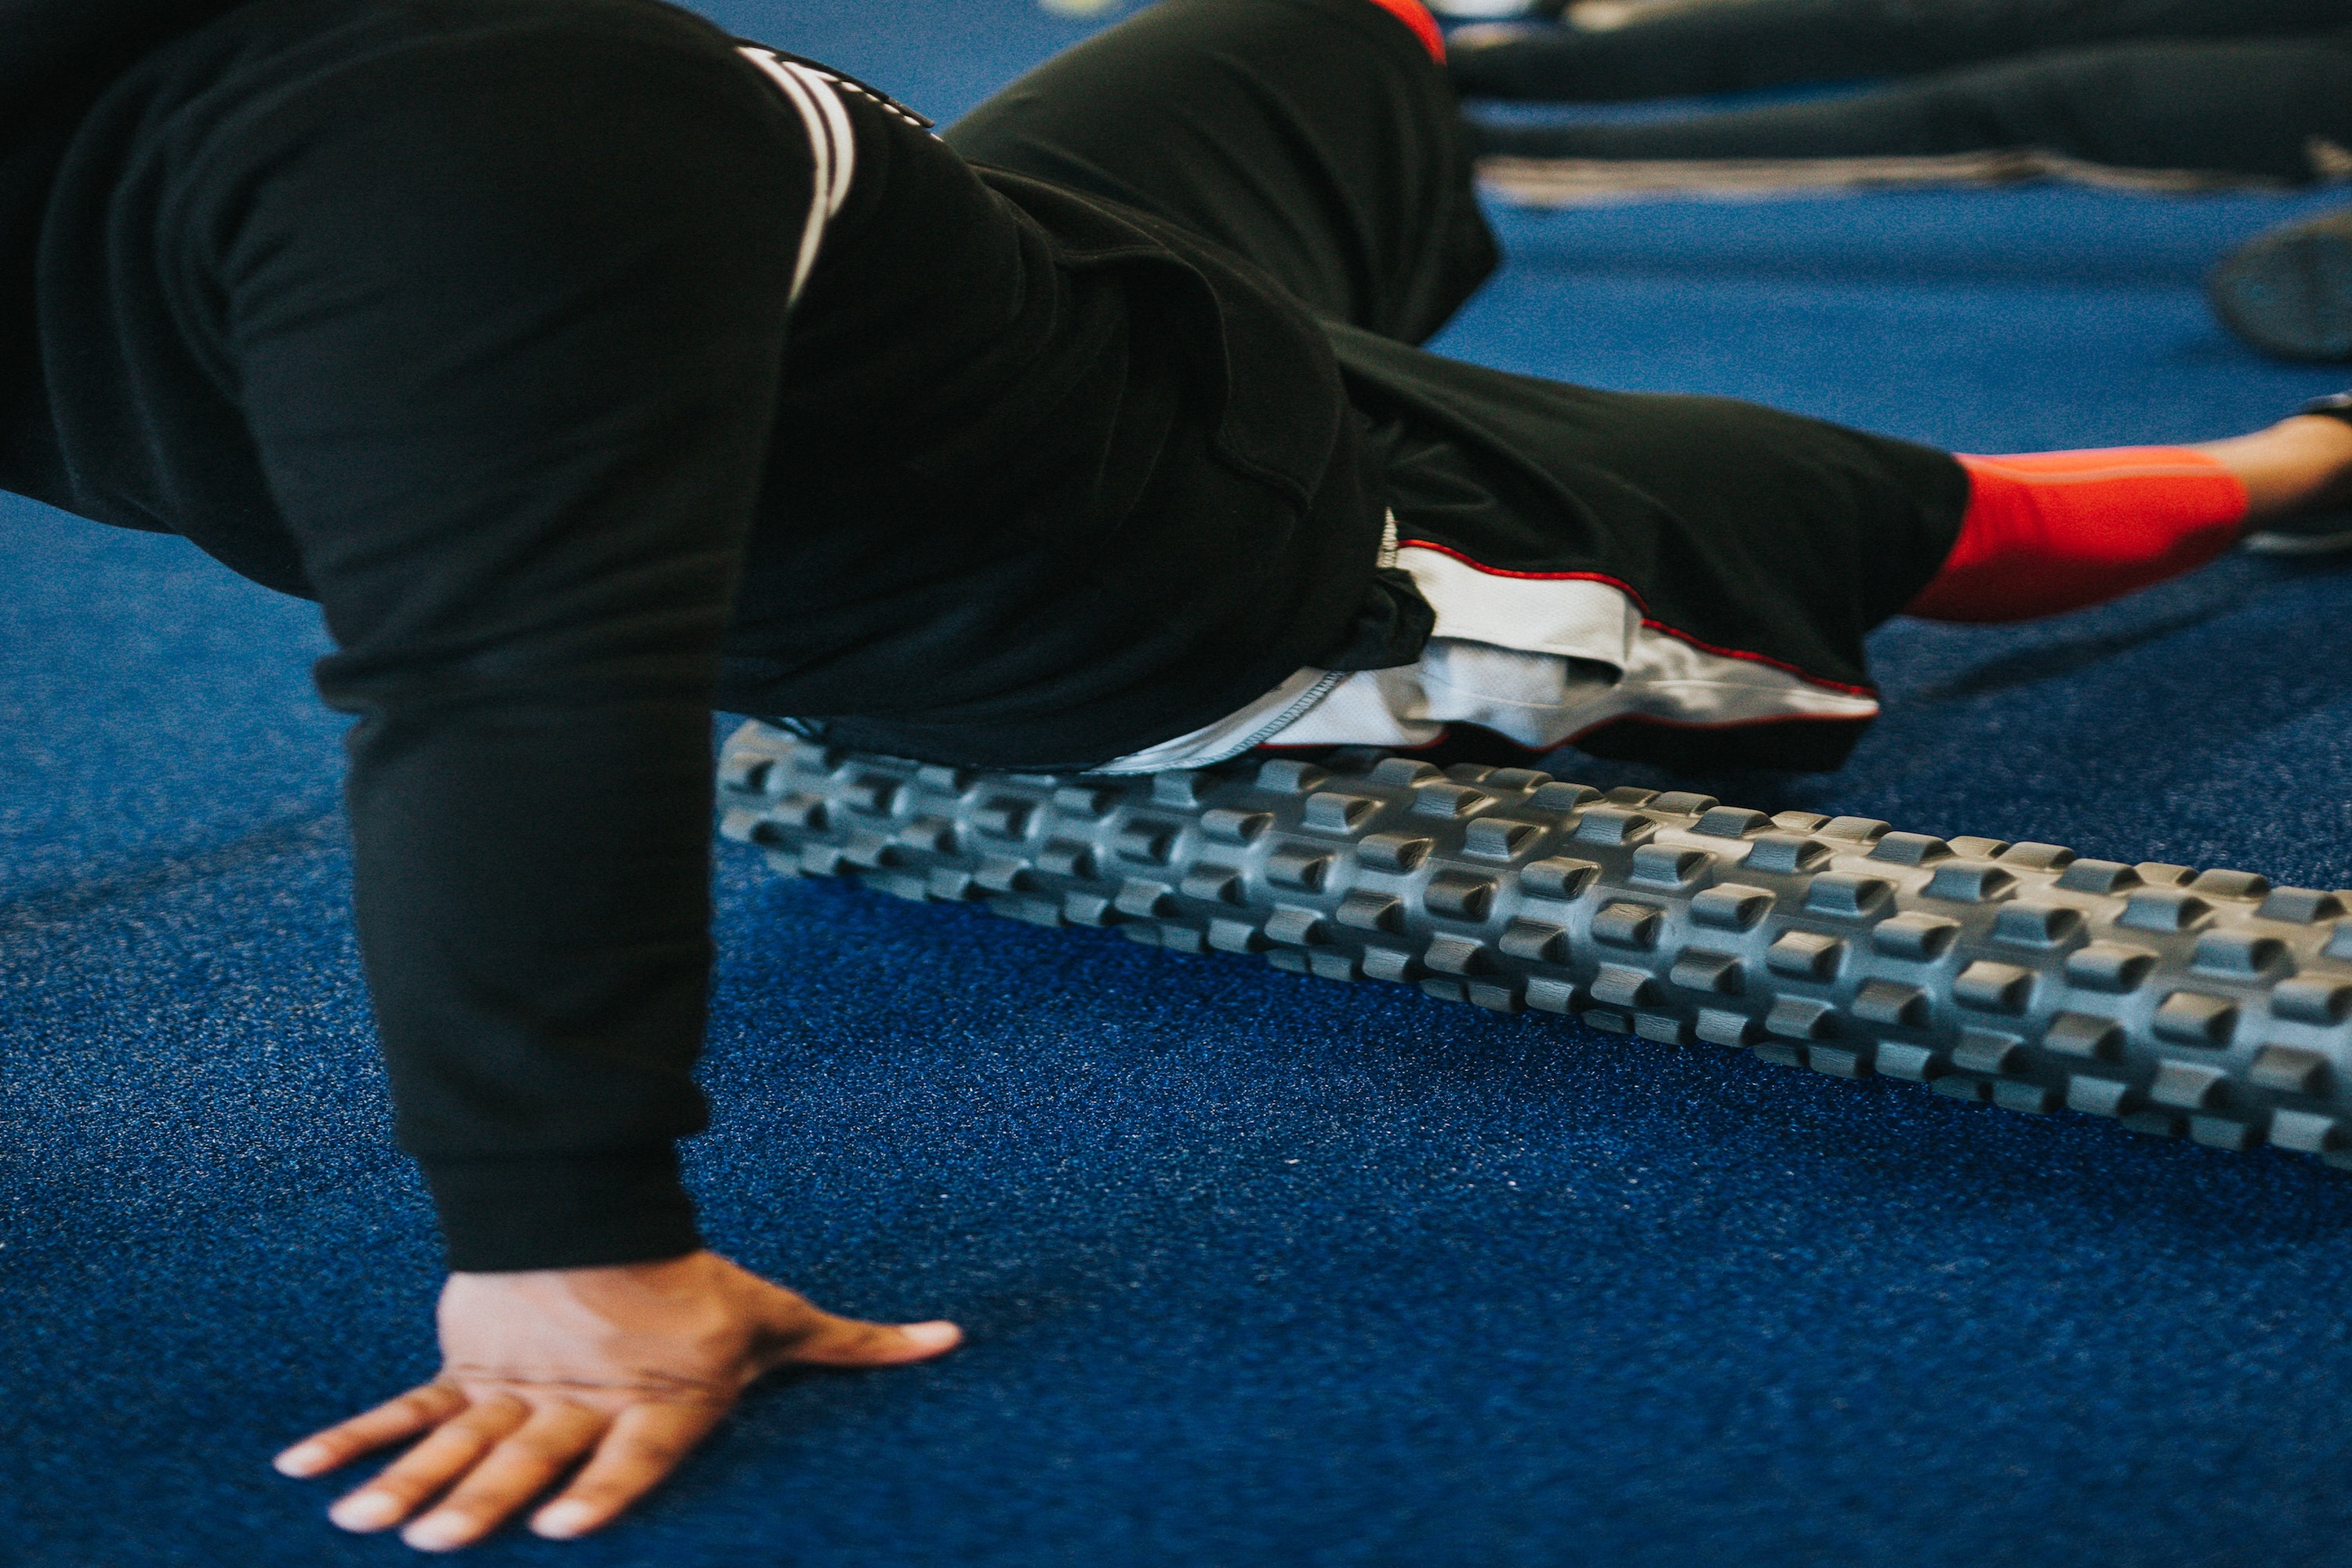 Foam Rolling Is a Waste of Time, Says Top Trainer